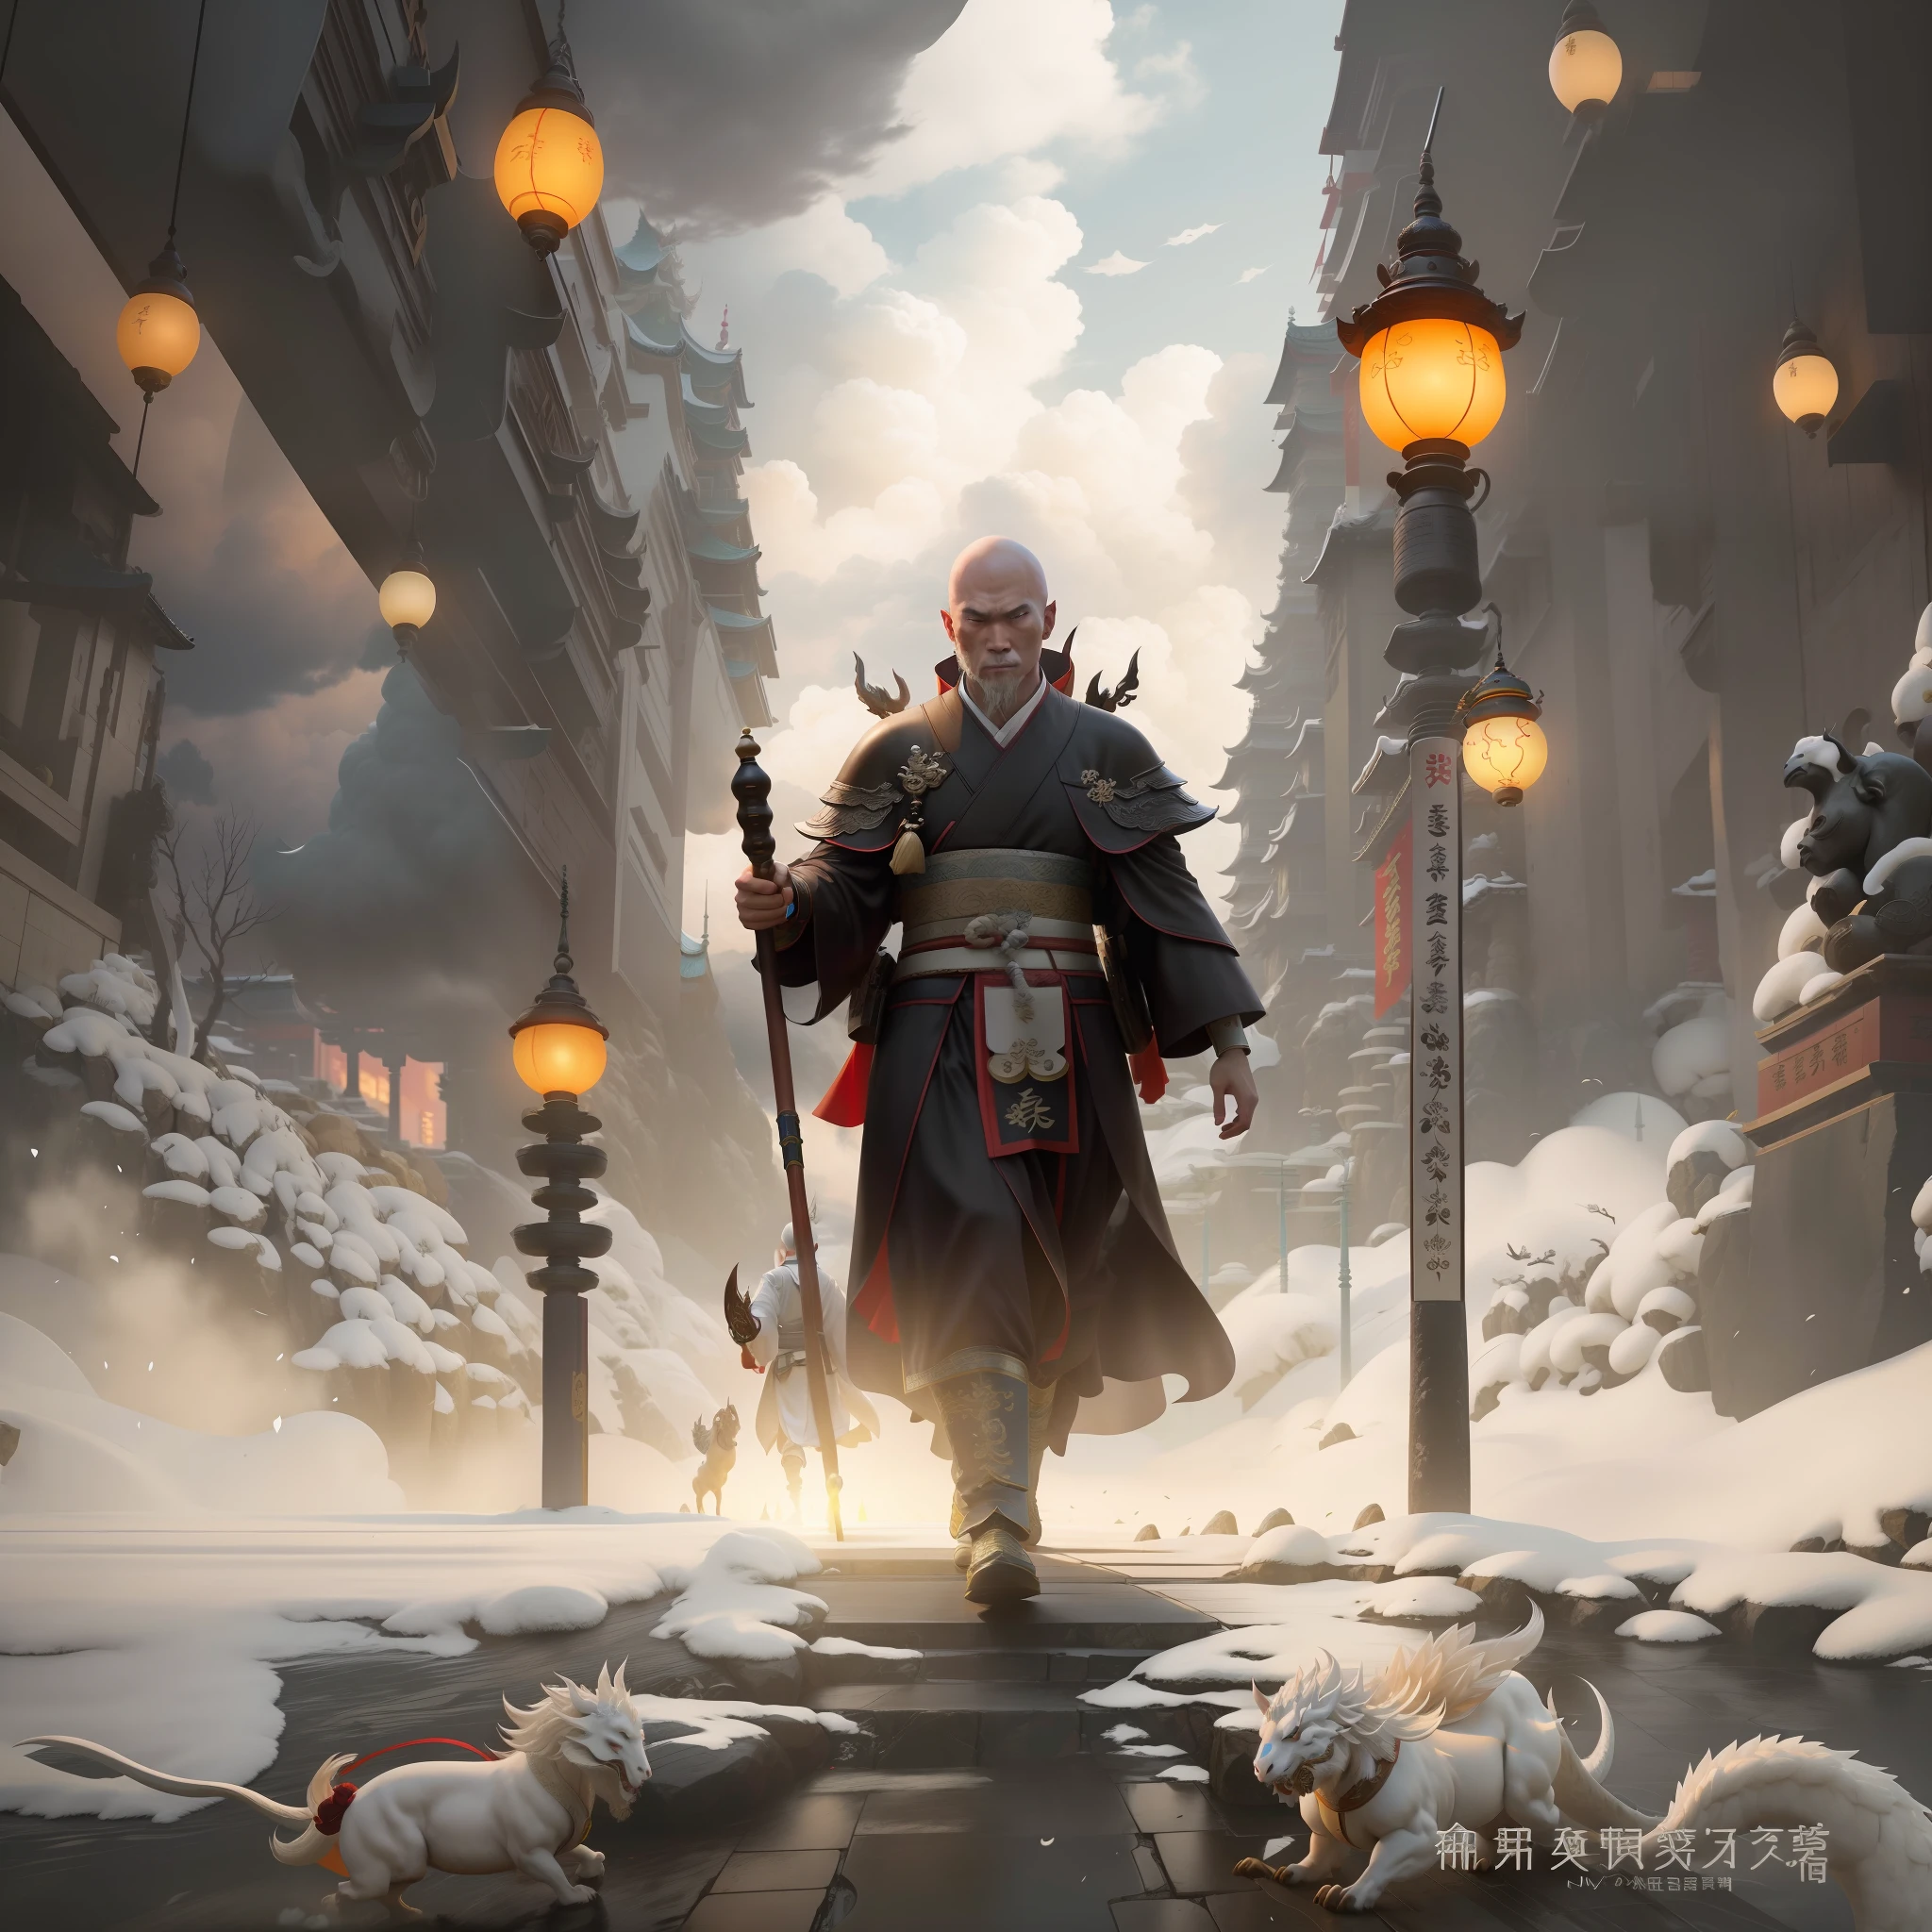 Bald Tang Dynasty young monk, a bald man monk in a cassock, walking through the street with a Zen staff, there are white dragon horses, auspicious clouds around Yang J, Zhu Feng, Andreas Rocha style, Titi Luatong, Victor Wang, conceptual art | Zhu Feng, Zeng Jing, Wu Baiyade, Yang Jin, Ren Xiong, Ju Chao Tang monk. The monk of the Tang Dynasty, with a resolute face, holding a Zen staff and a white dragon horse, walked forward, with magnificent and auspicious clouds in the background